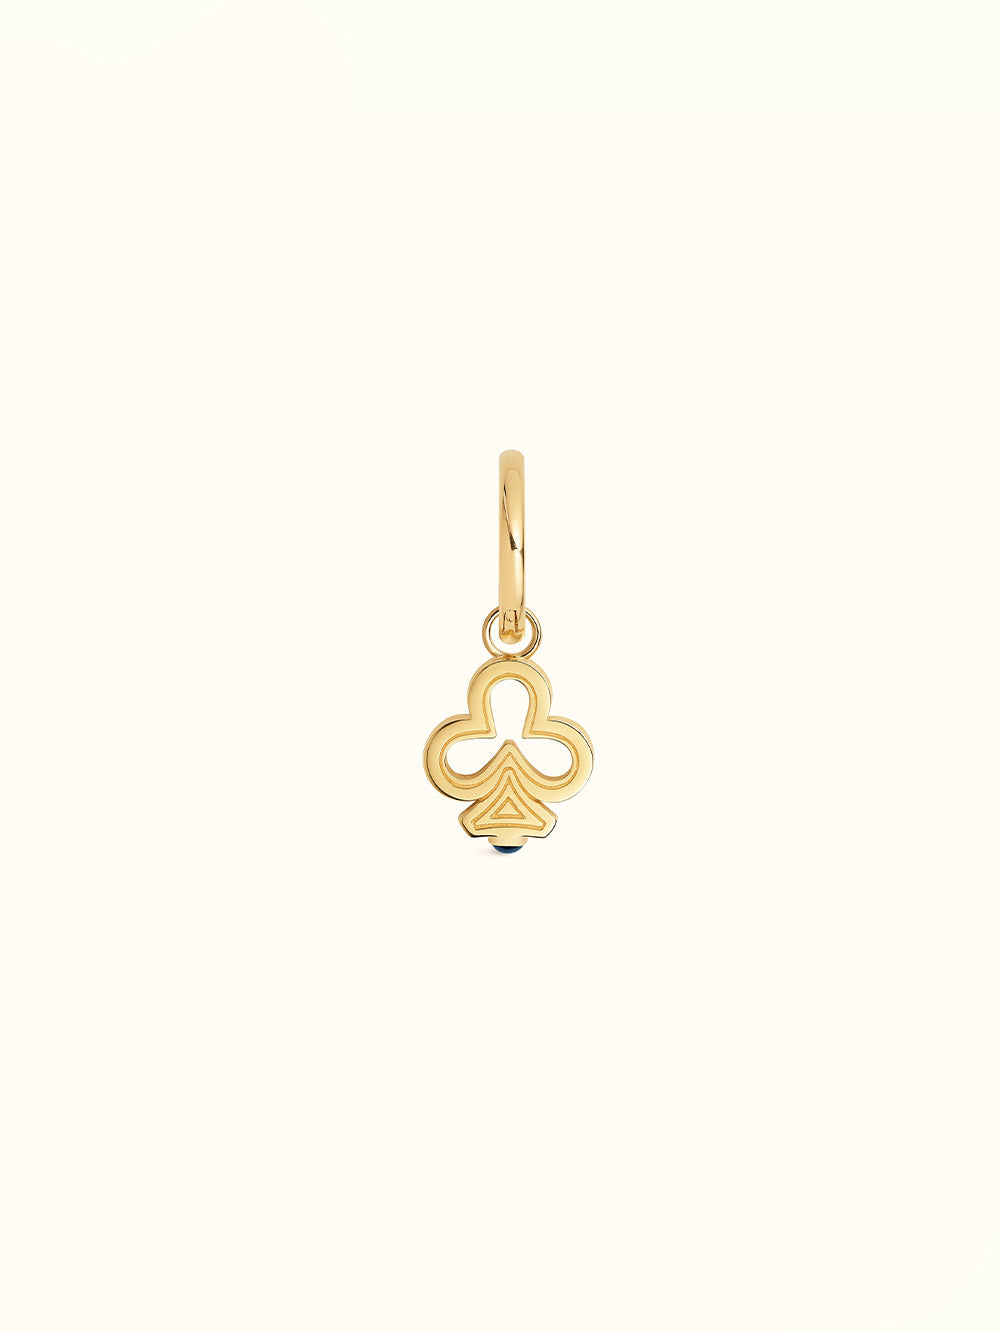 BABY CHARM CLOVER GOLD AND BLUE SAPPHIRE EARRING